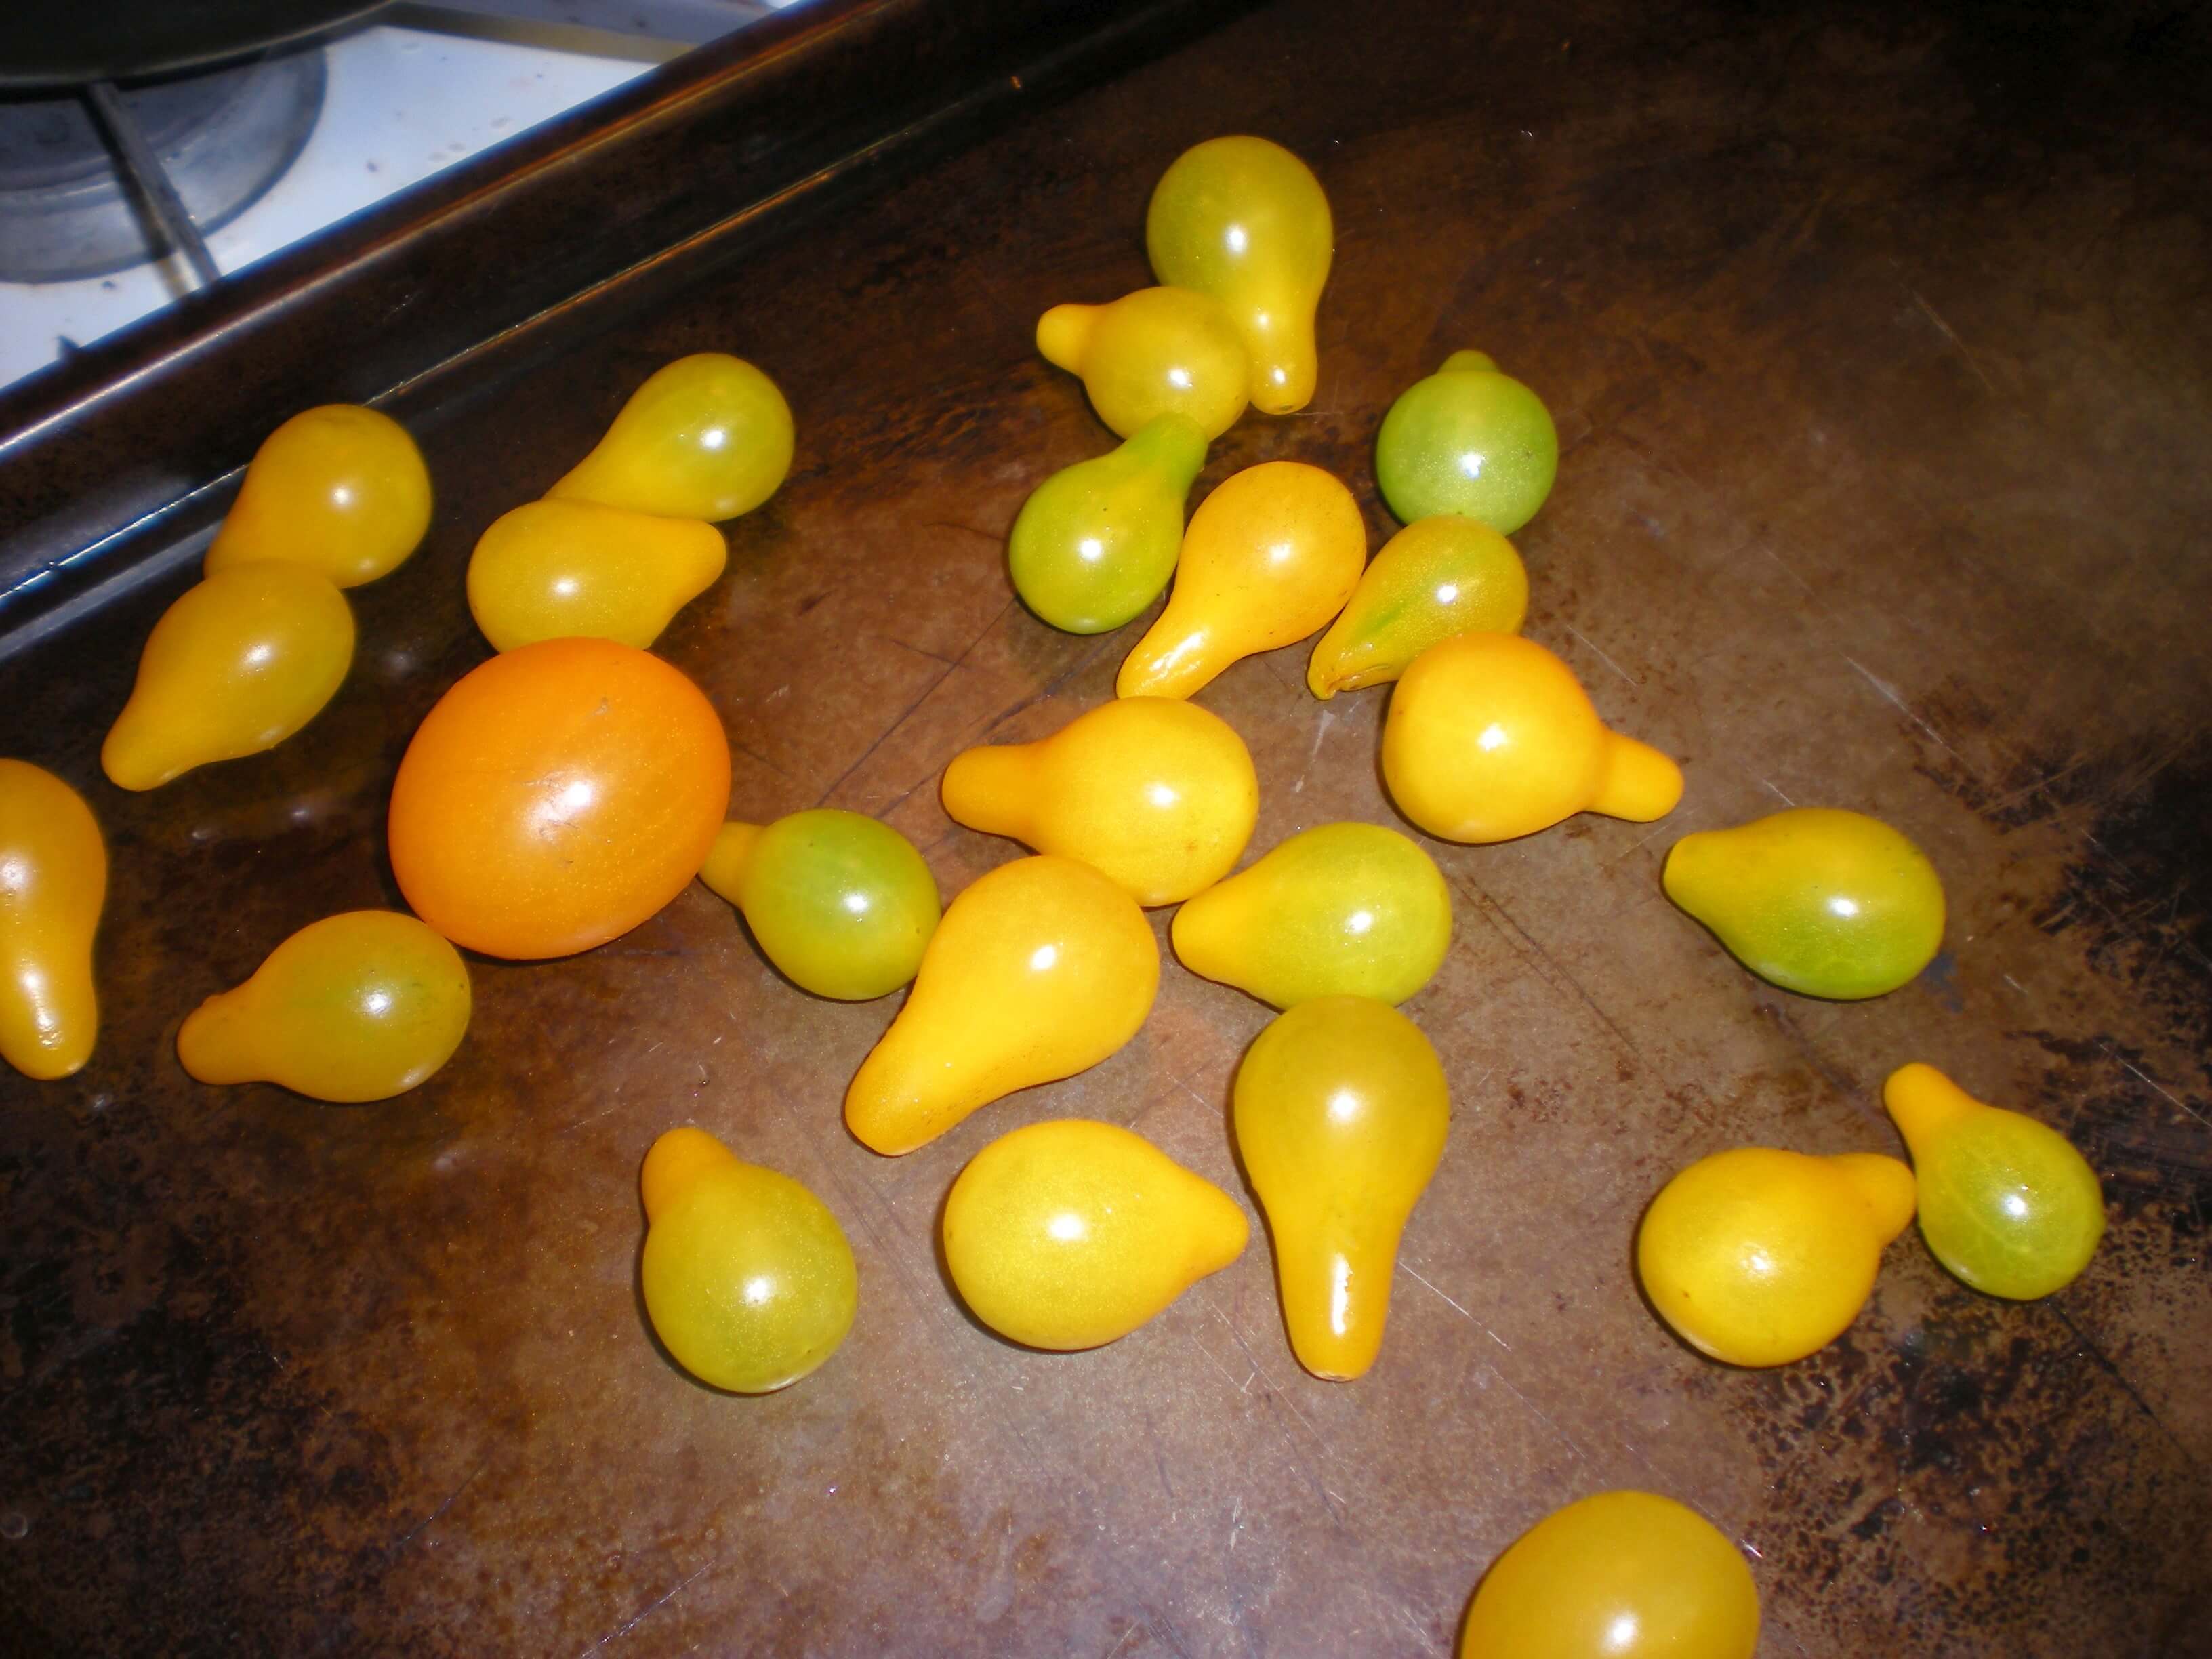 love these quirky little tomatoes!